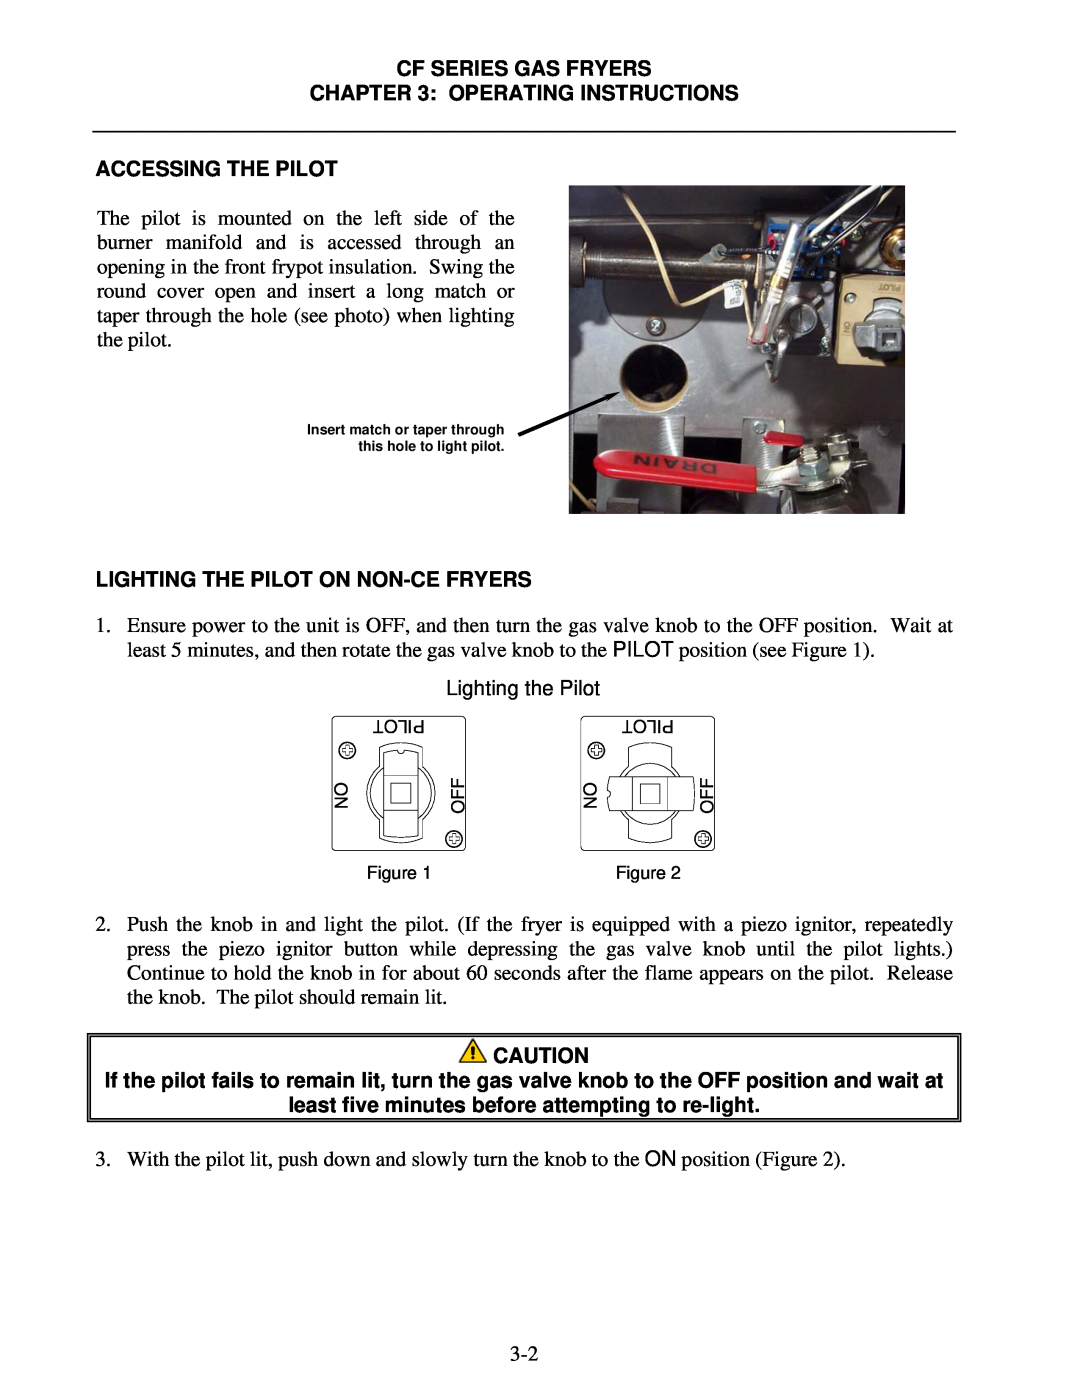 Frymaster FMCF Cf Series Gas Fryers Operating Instructions, Accessing The Pilot, Lighting The Pilot On Non-Ce Fryers 